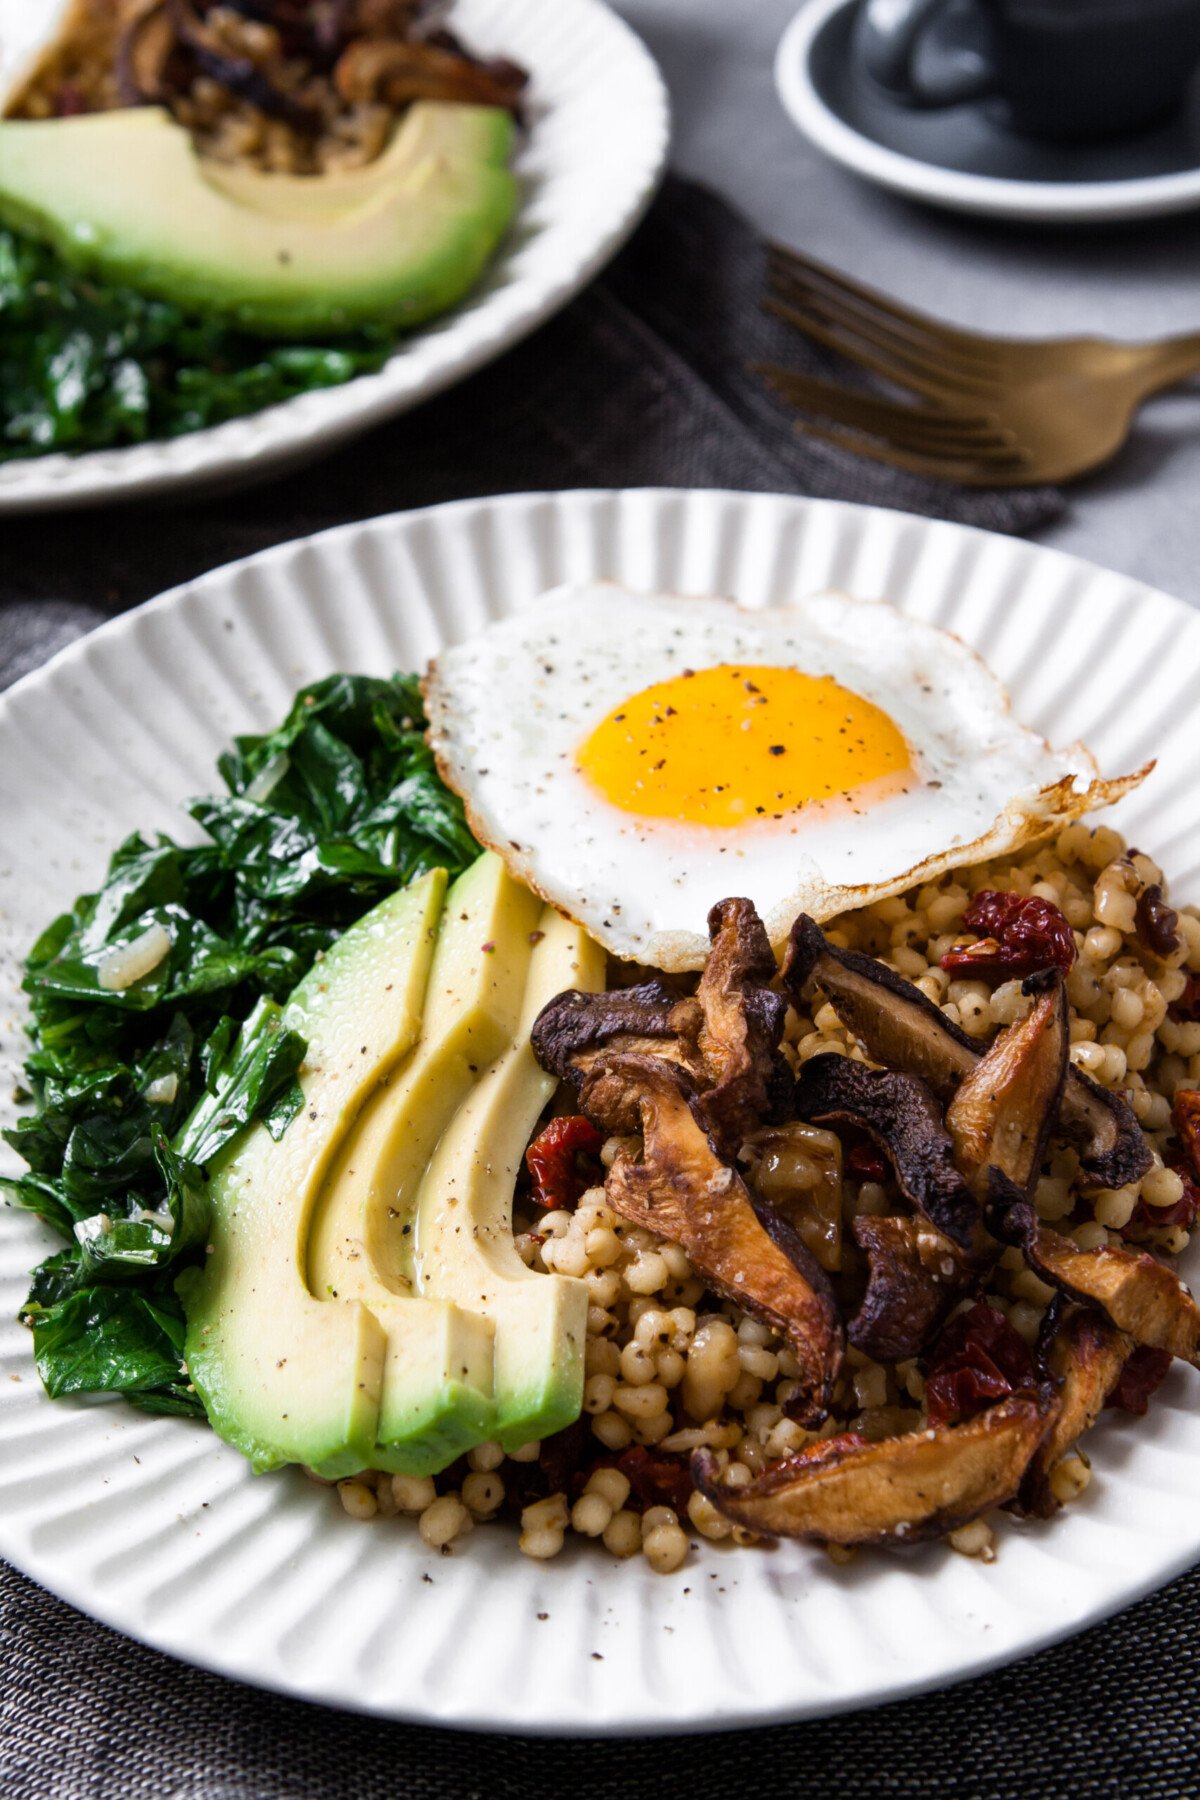 two white bowls filled with grains, sautéed greens, sliced avocado, and topped with a sunny side up egg